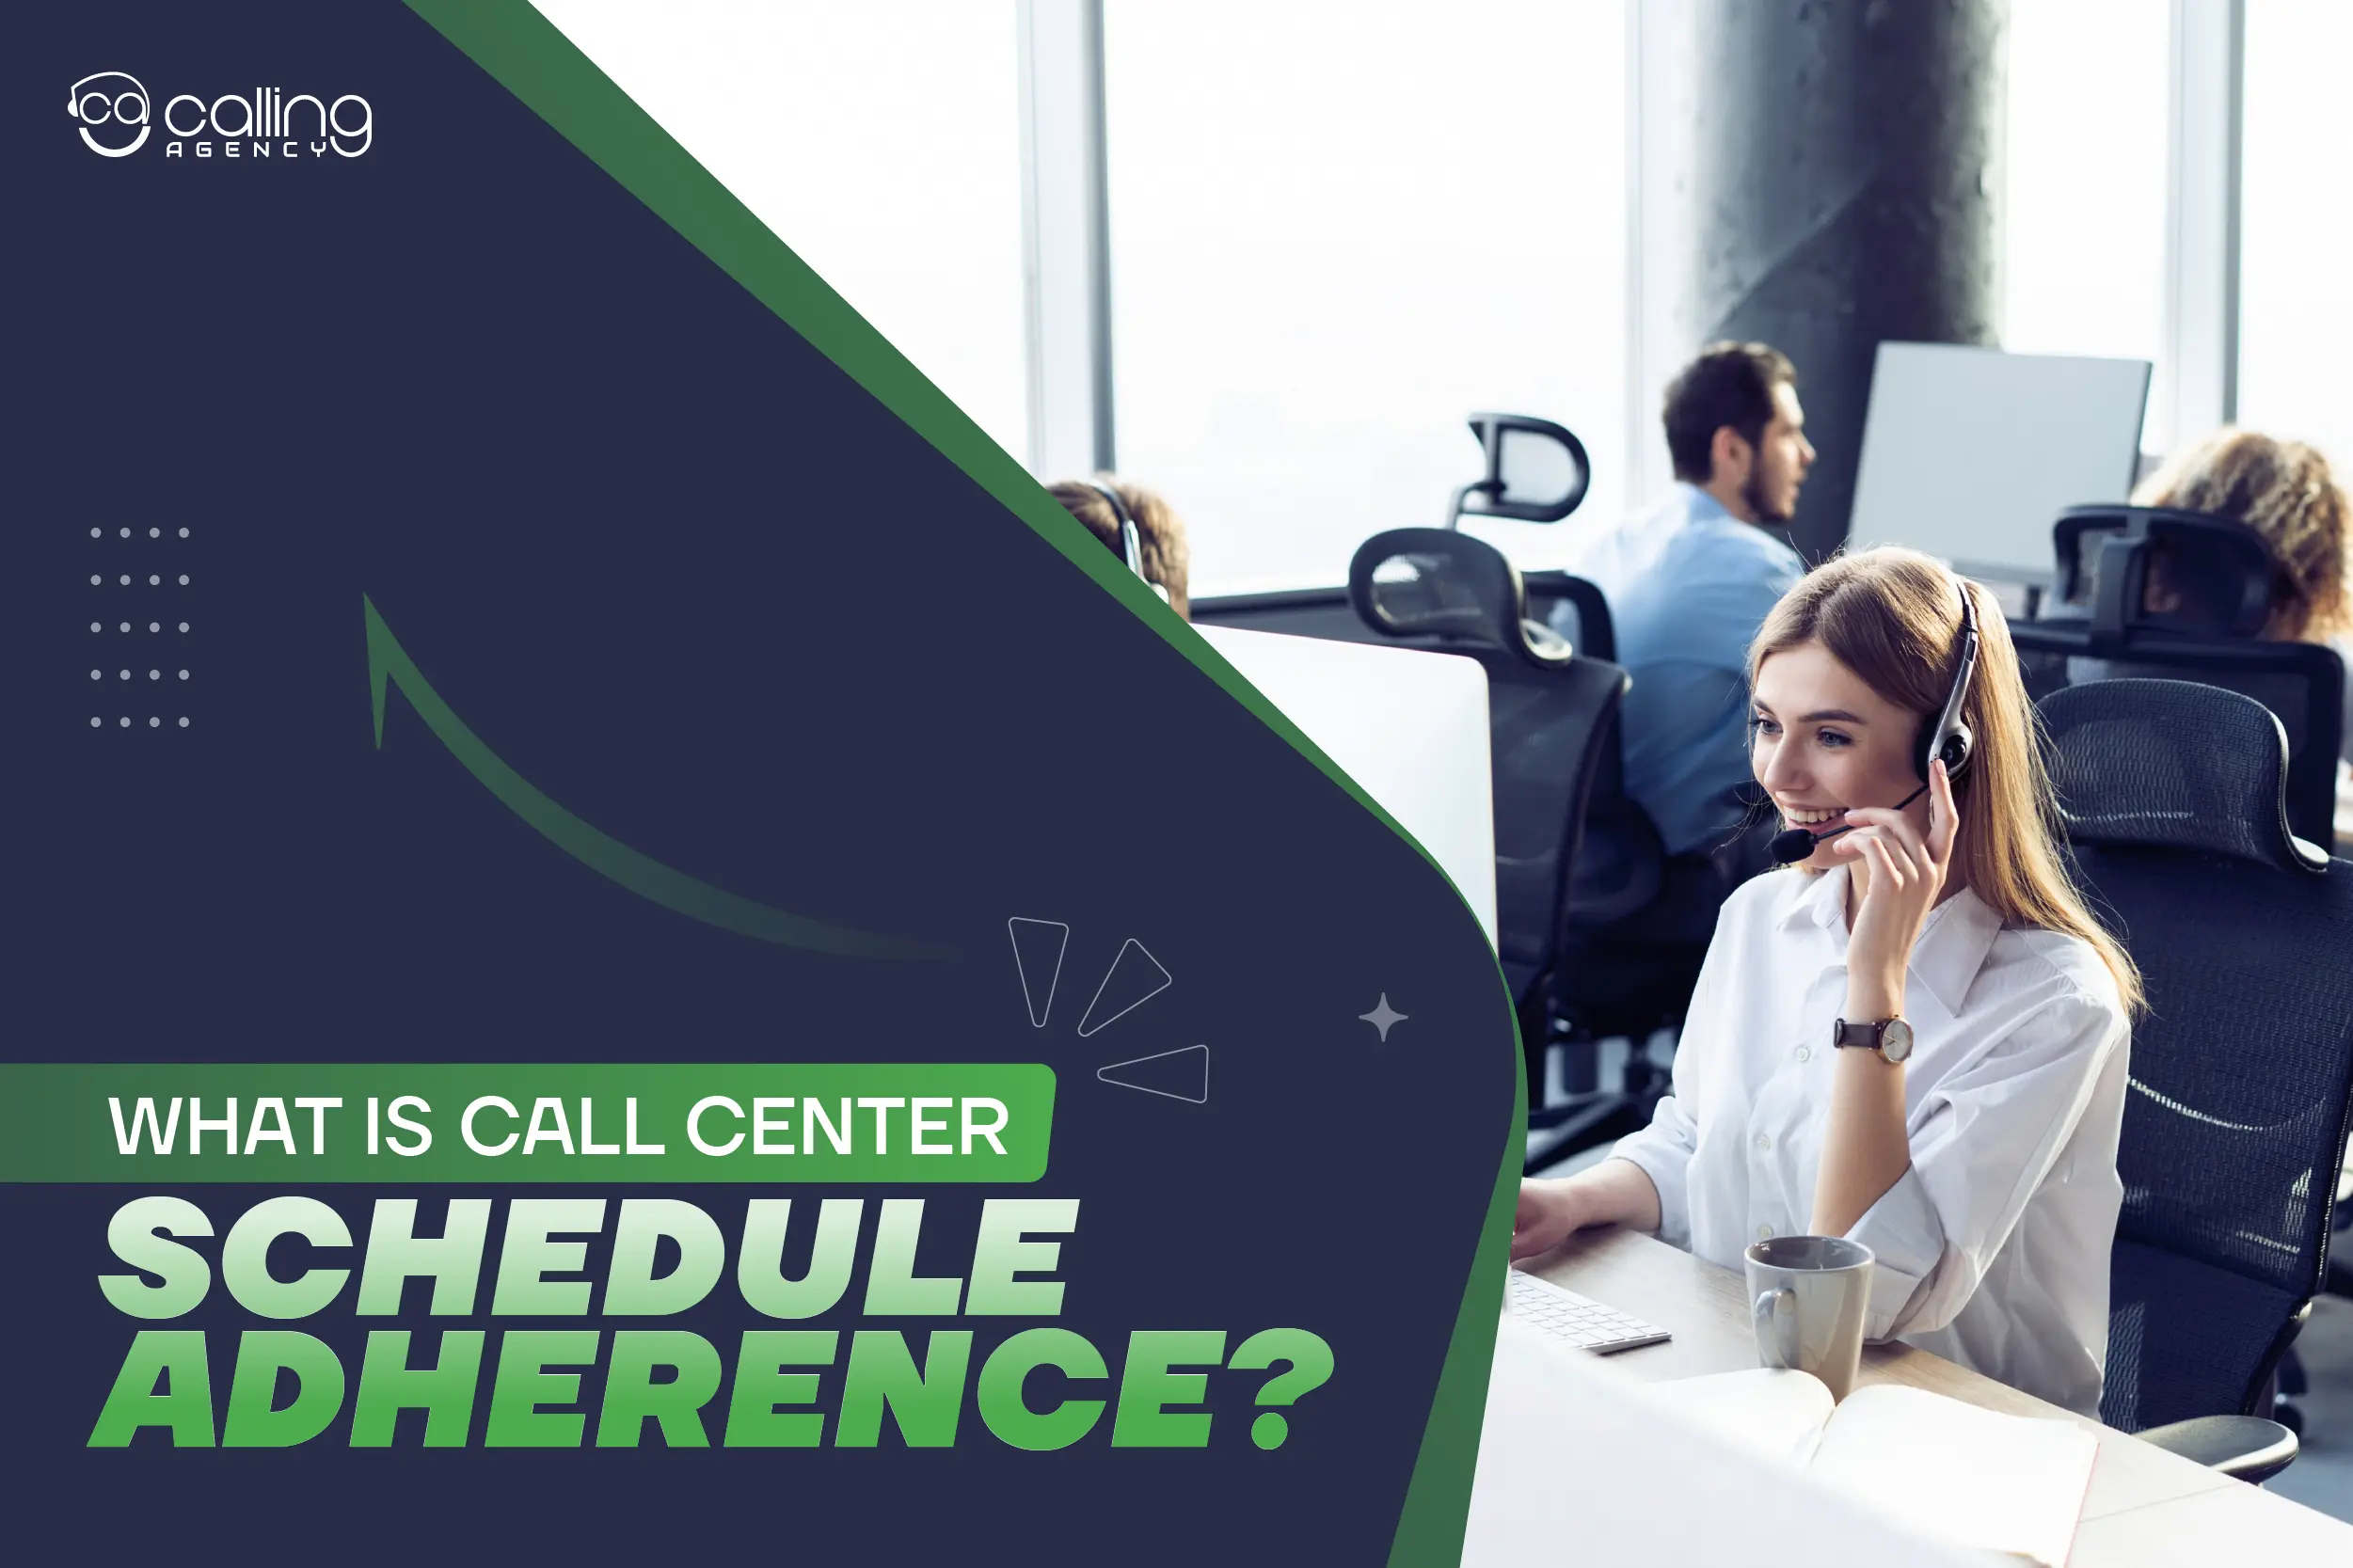 What Is Call Center Schedule Adherence?